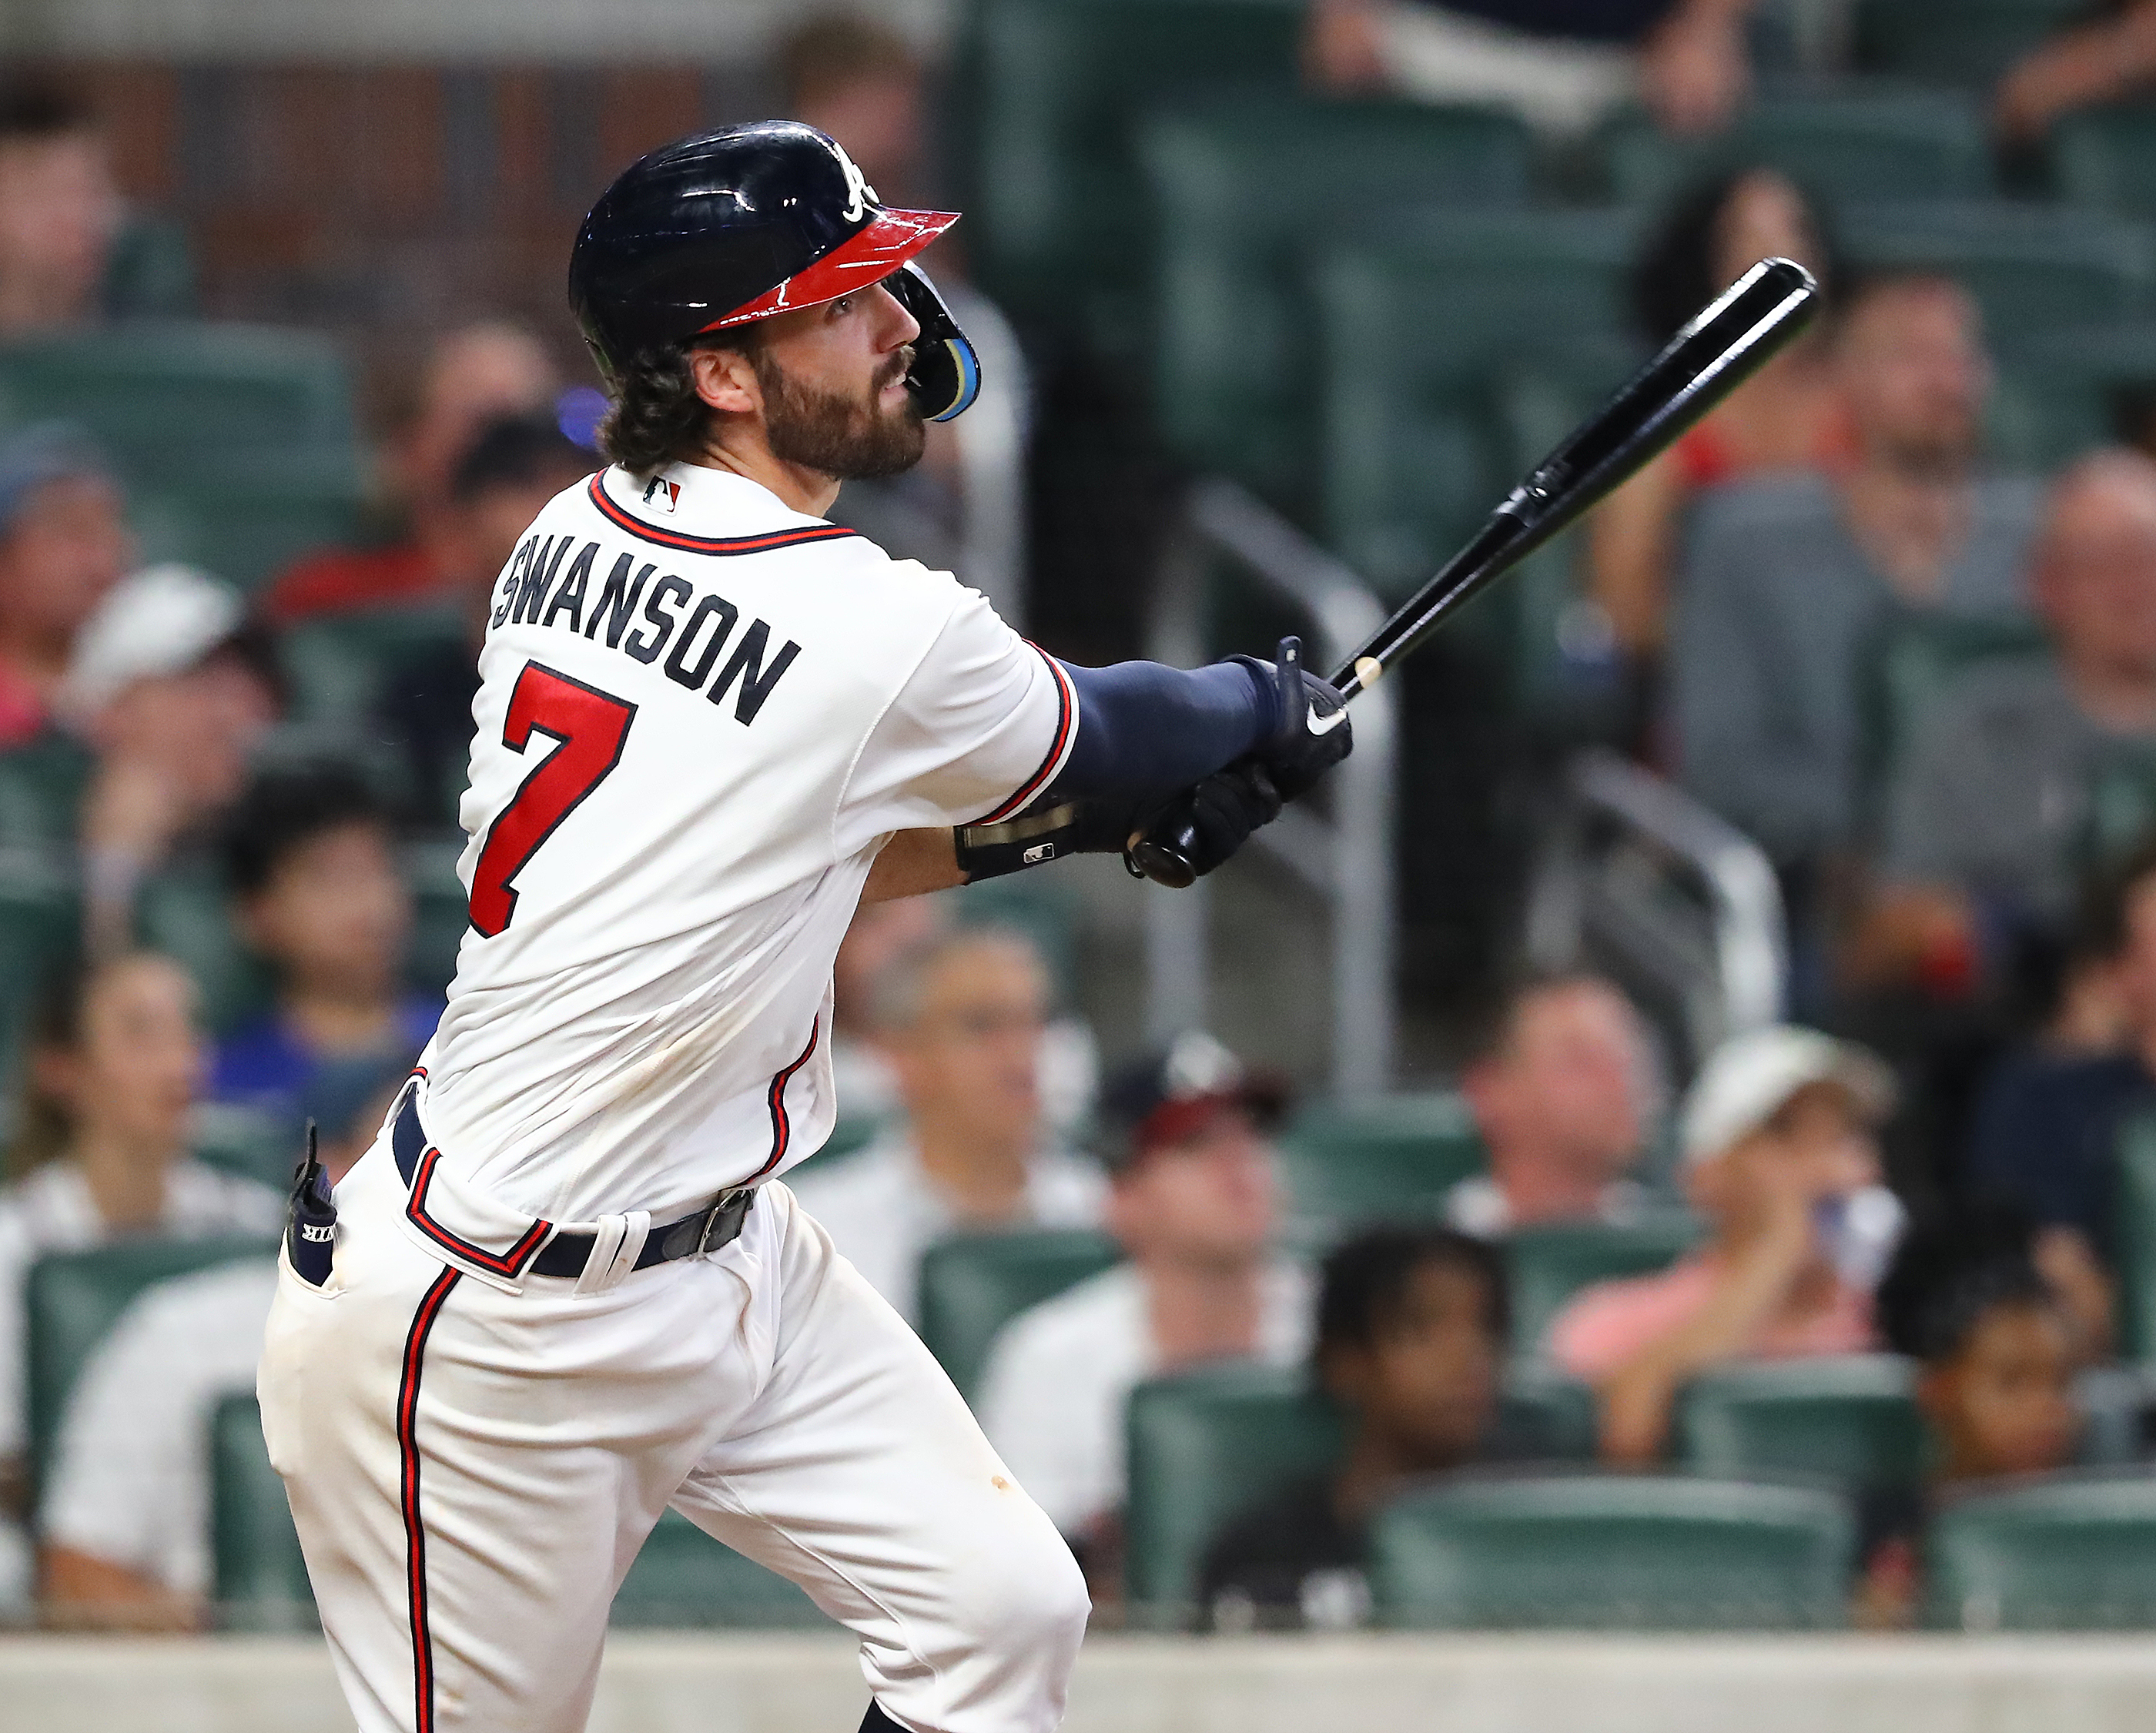 Braves score three in ninth to walk off with a win over the Giants